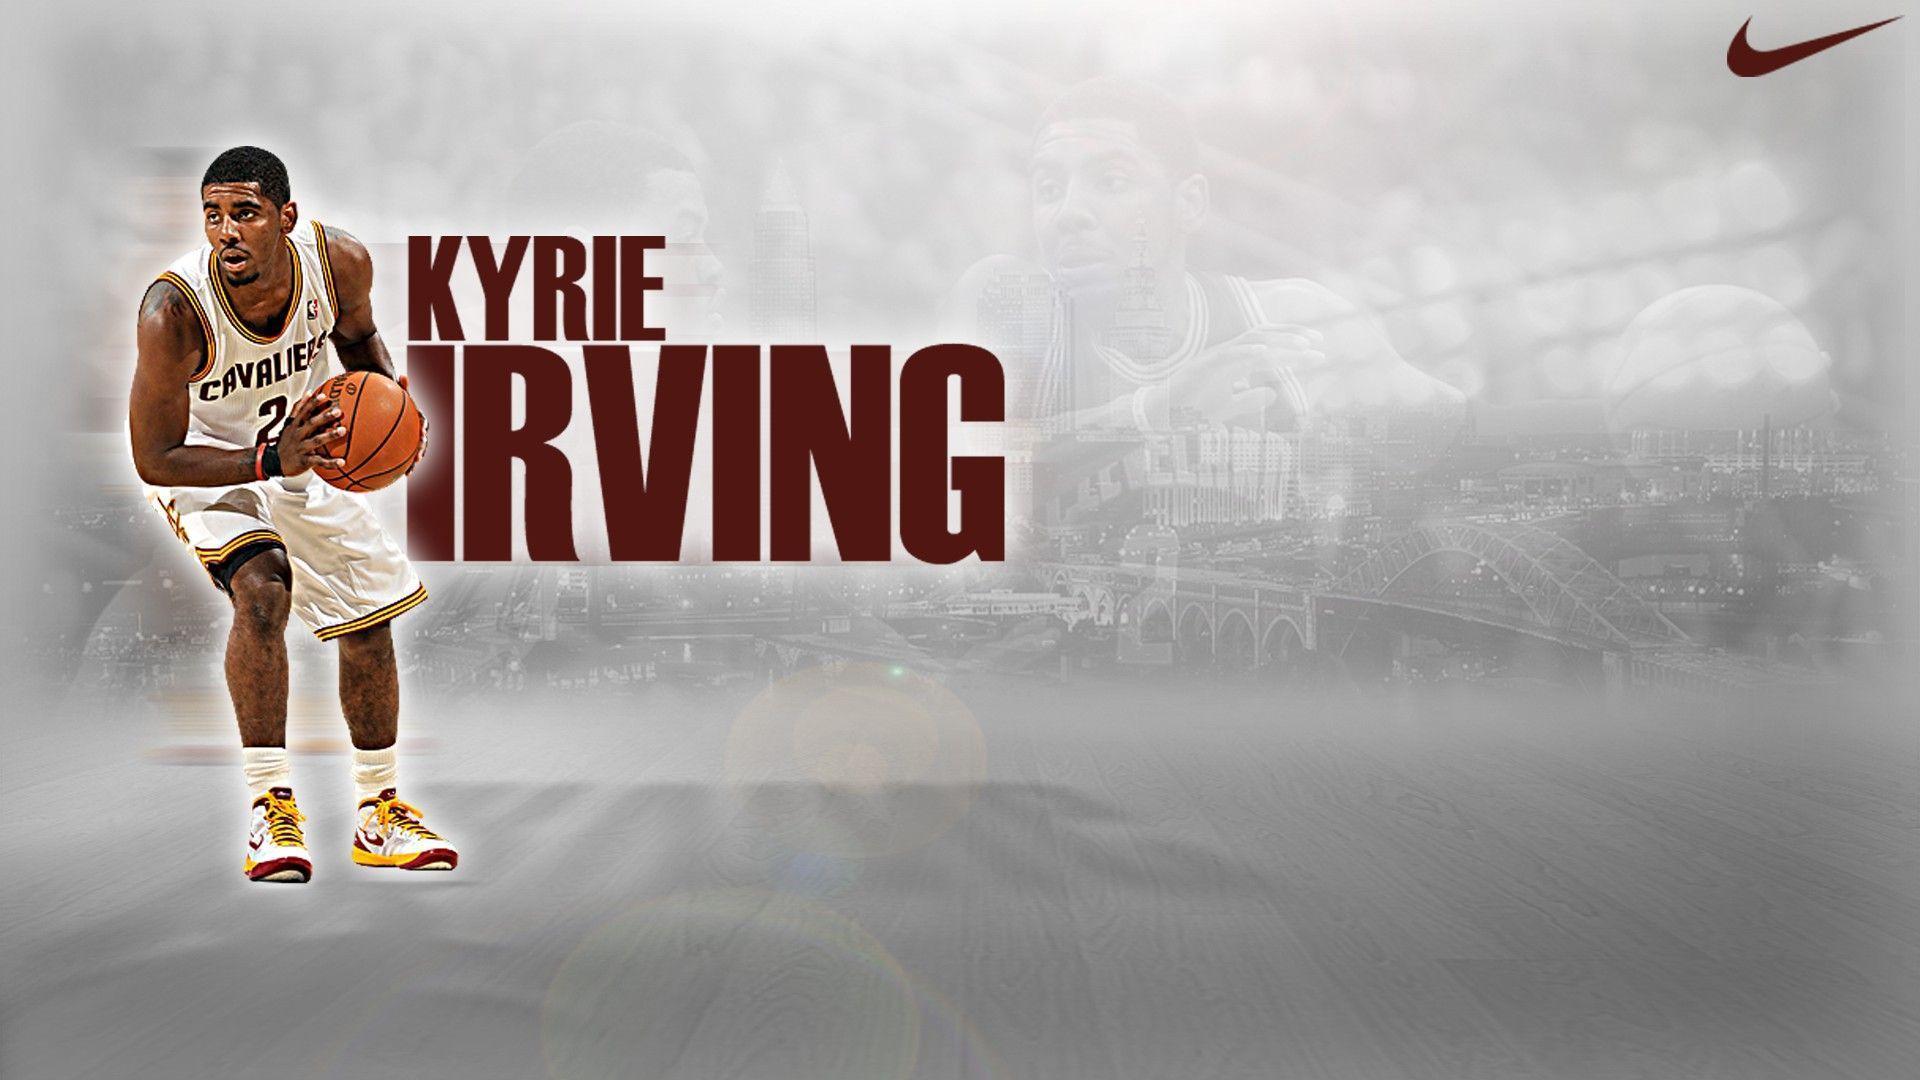 Kyrie Irving 2013 HD Wallpapers of Sports